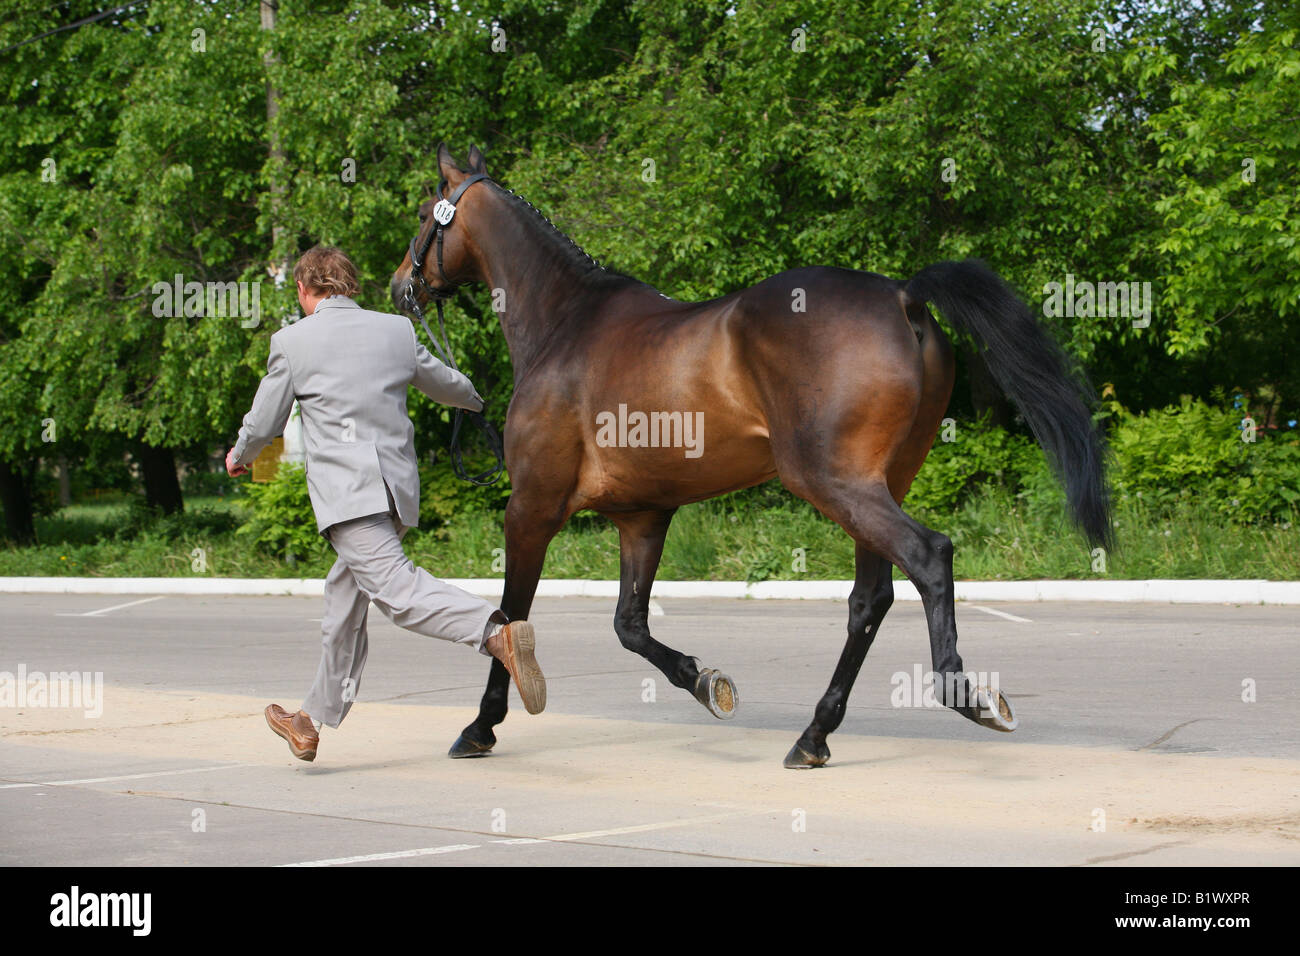 Man in suit running with dressage Warmblood horse Stock Photo